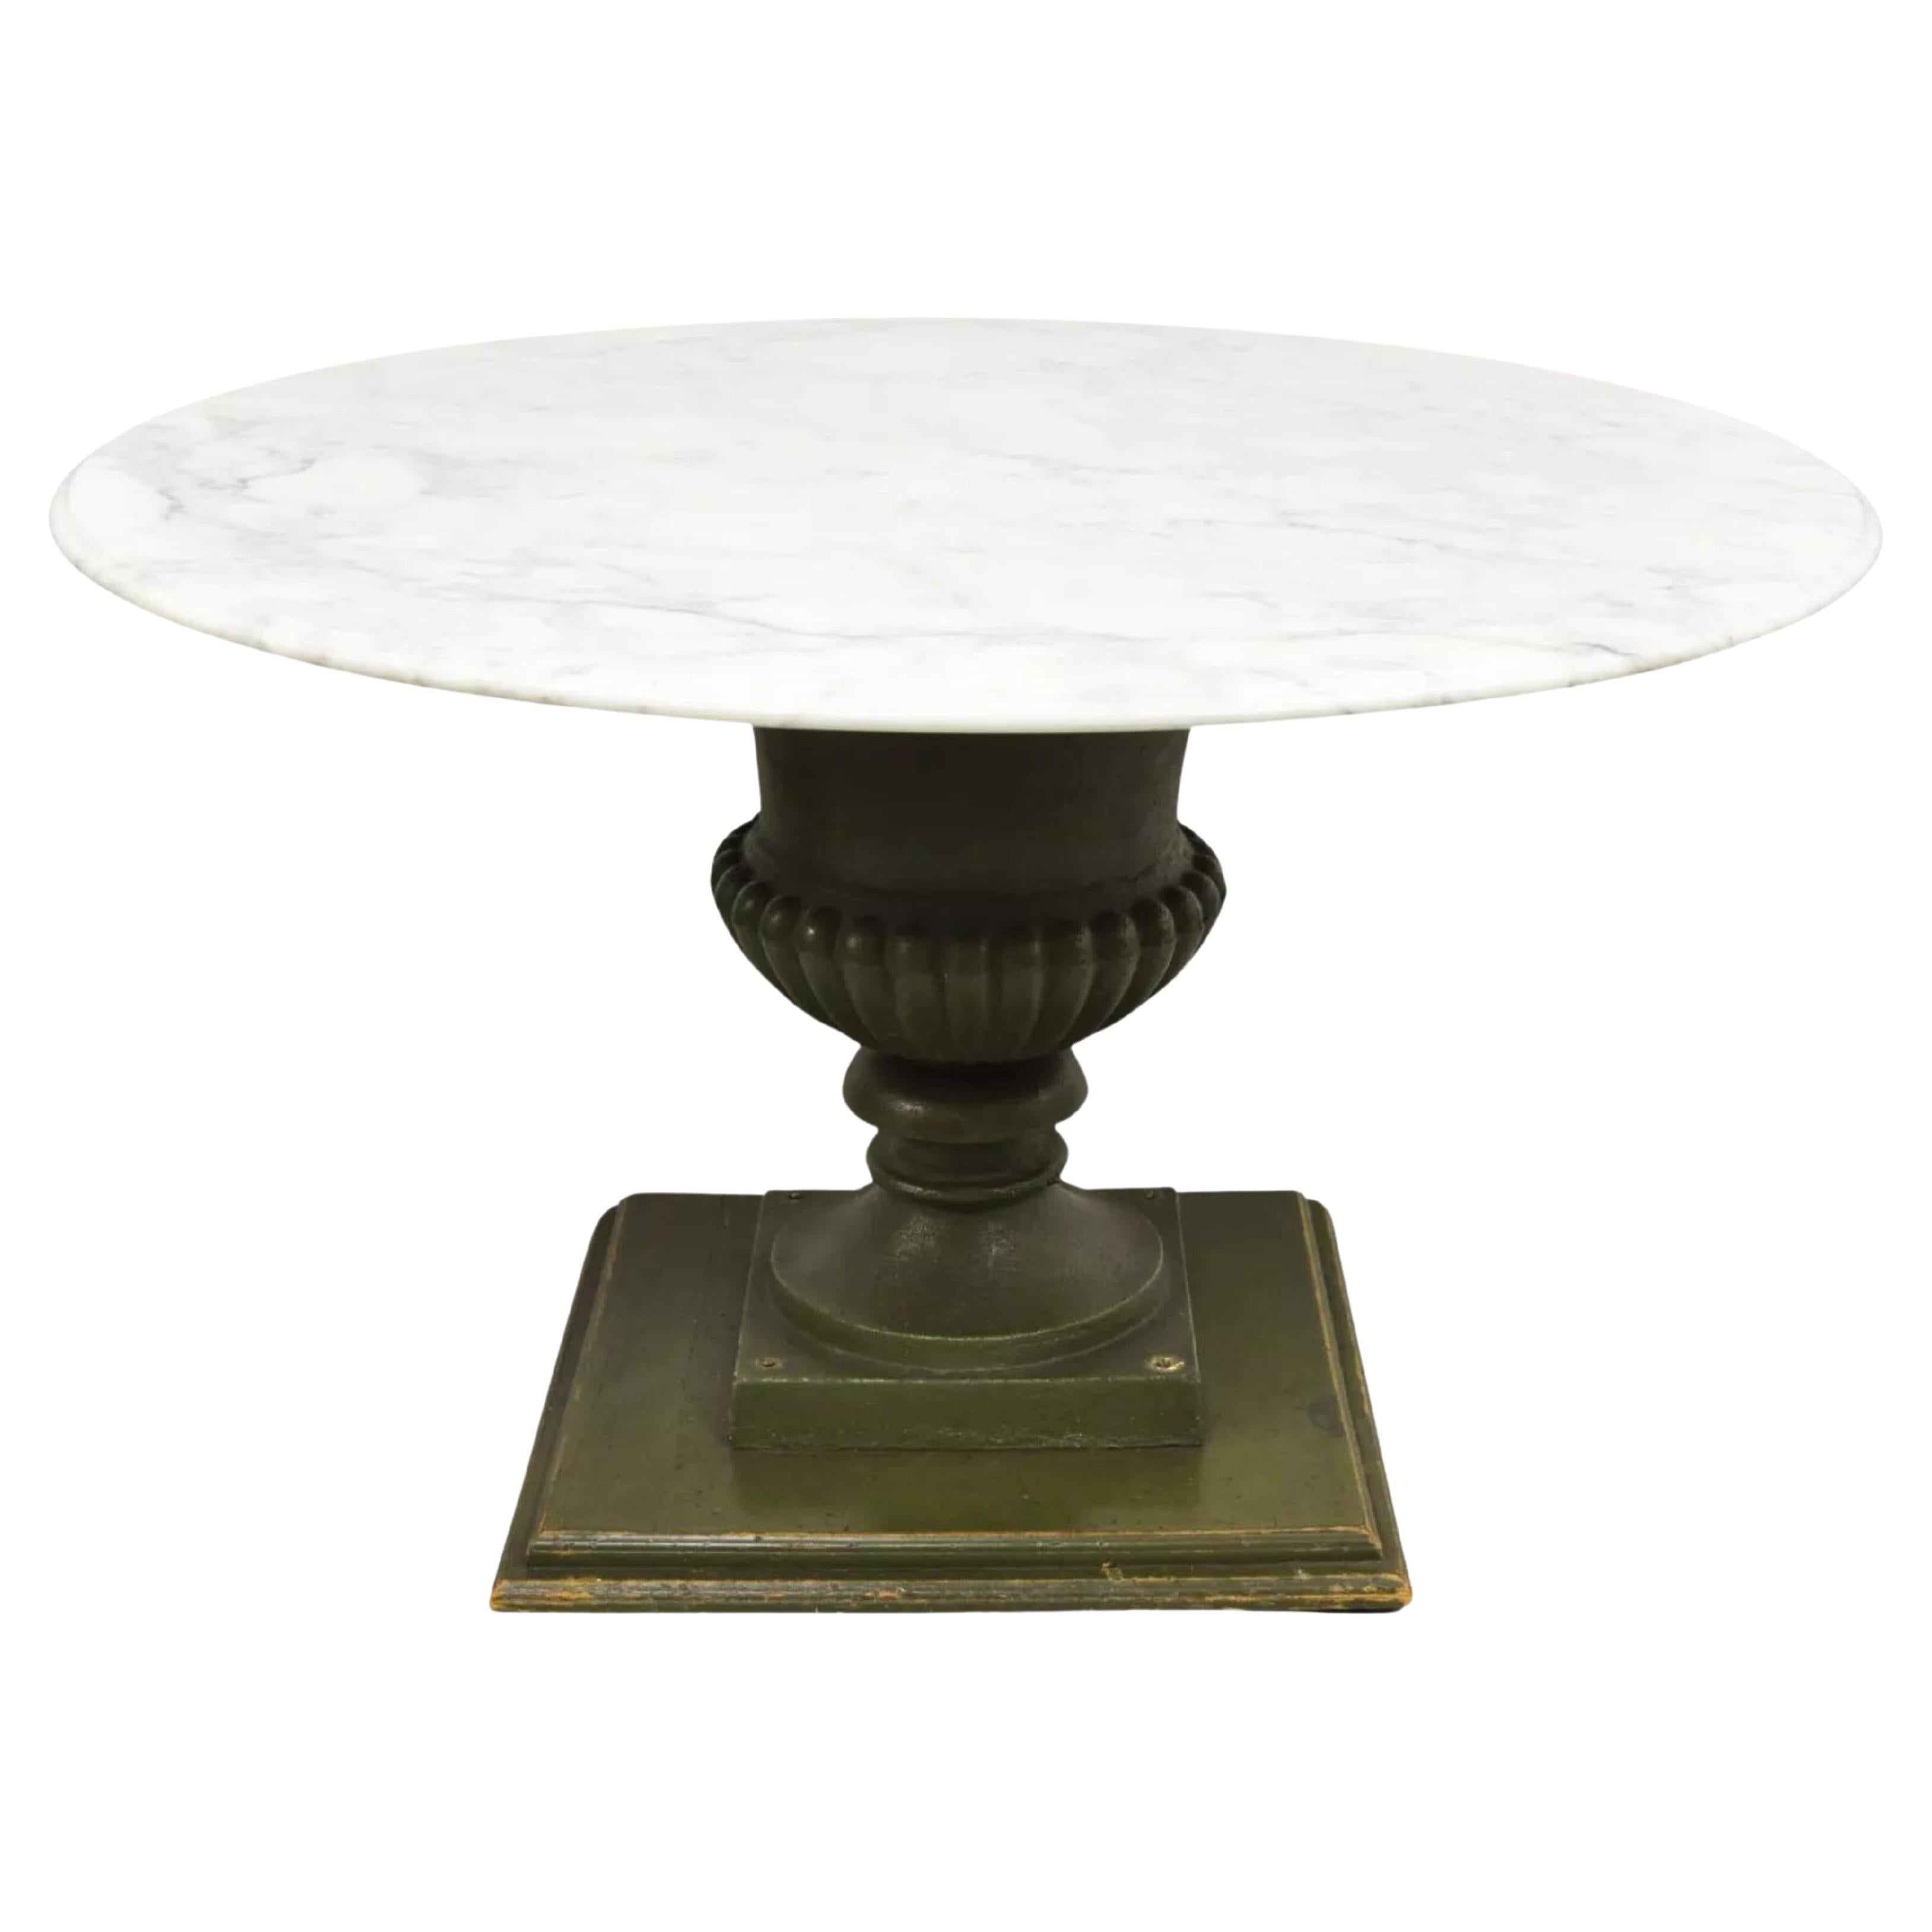 Italian Classical Cast Iron Urn Planter Pedestal Base Round Marble Dining Table For Sale